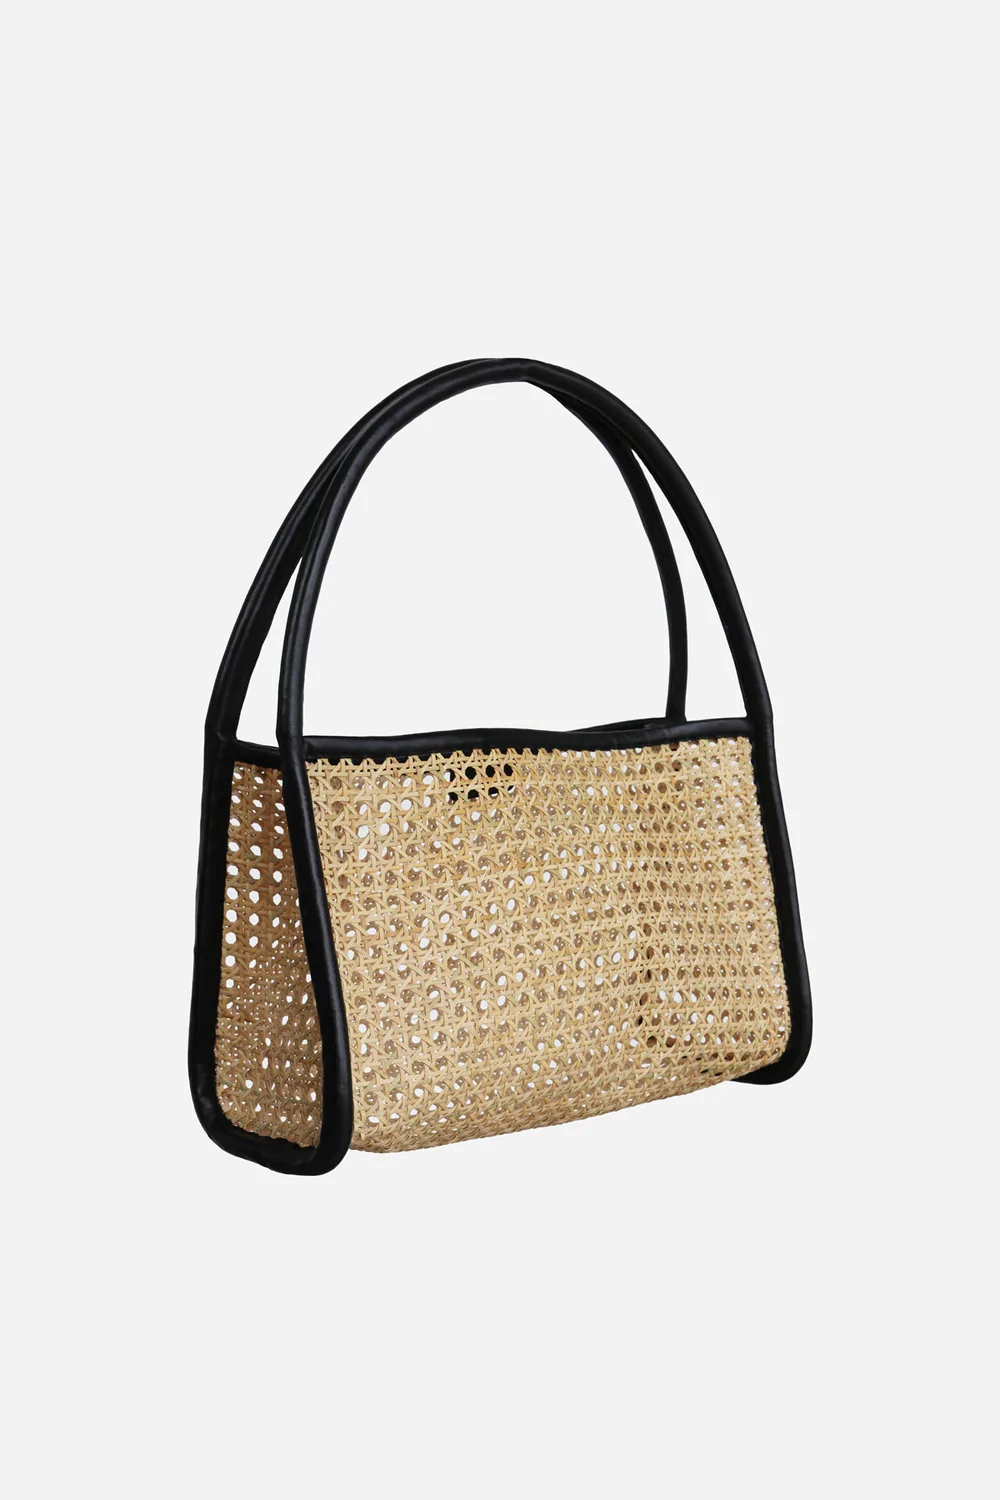 Product Image for Rattan Small Tote, Natural